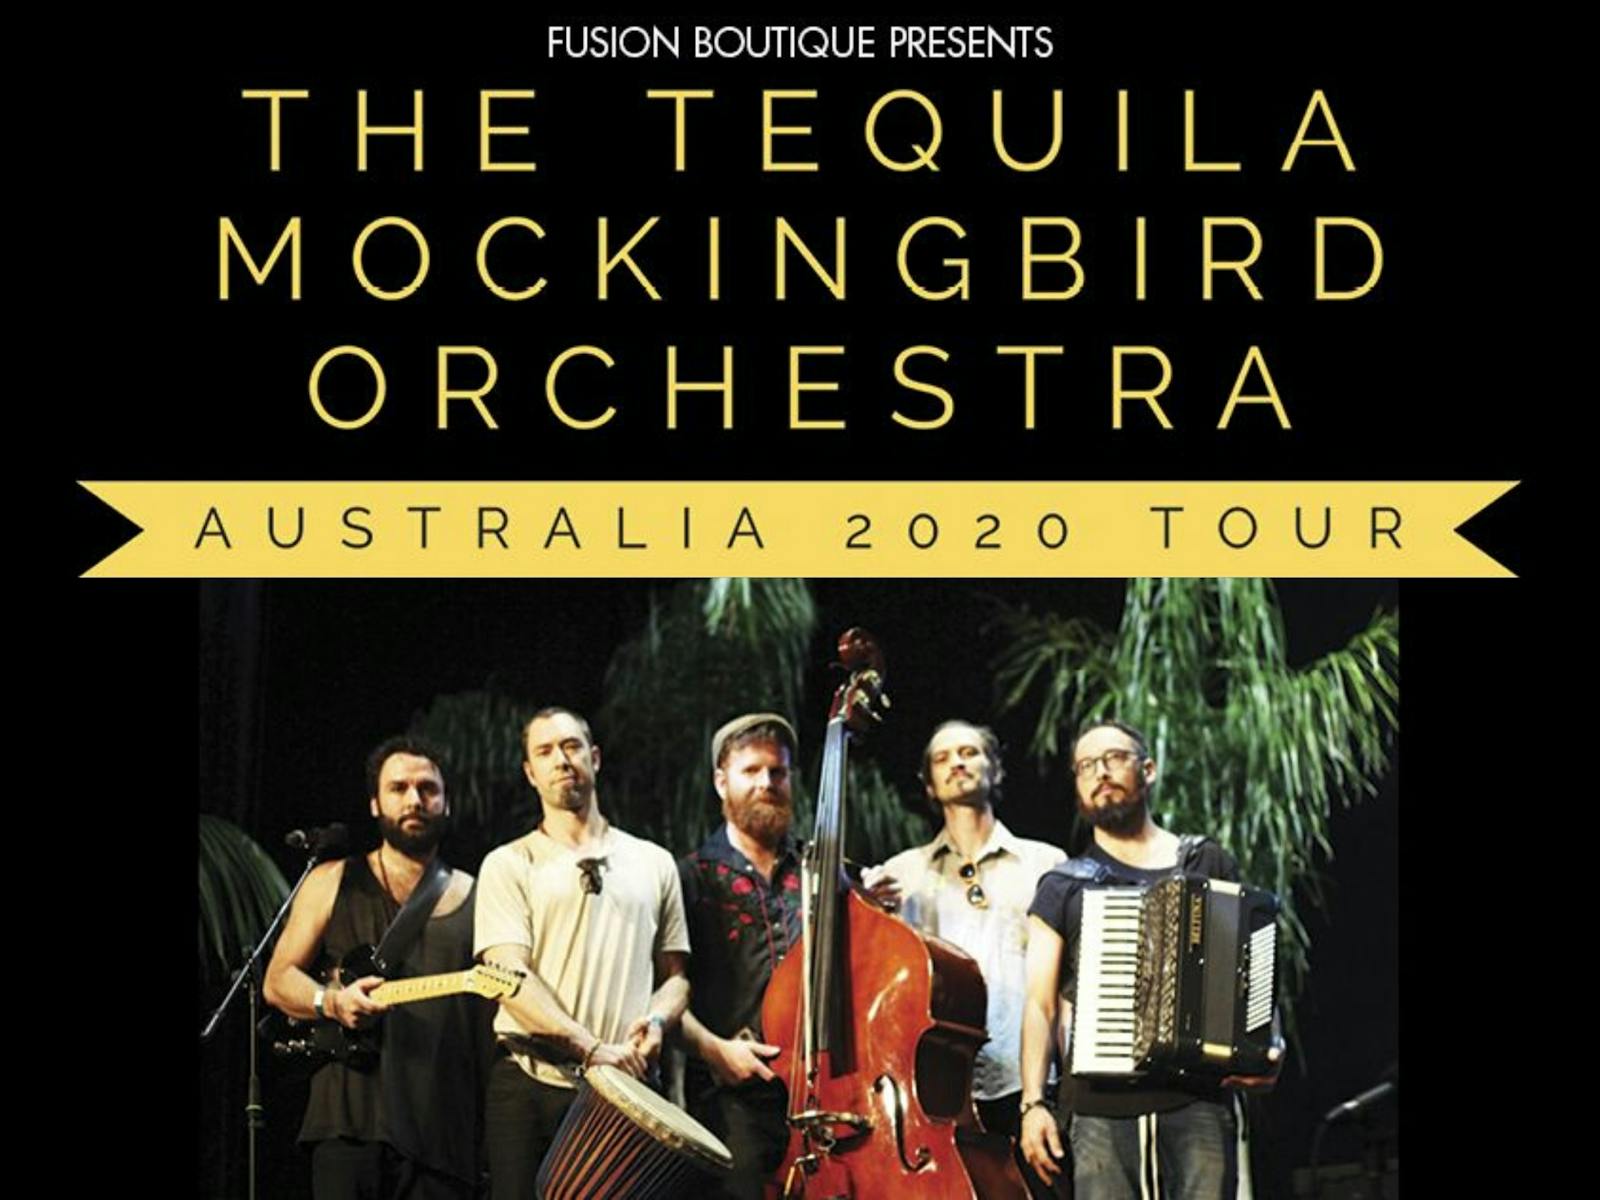 Image for Fusion Boutique Presents The Tequila Mockingbird Orchestra